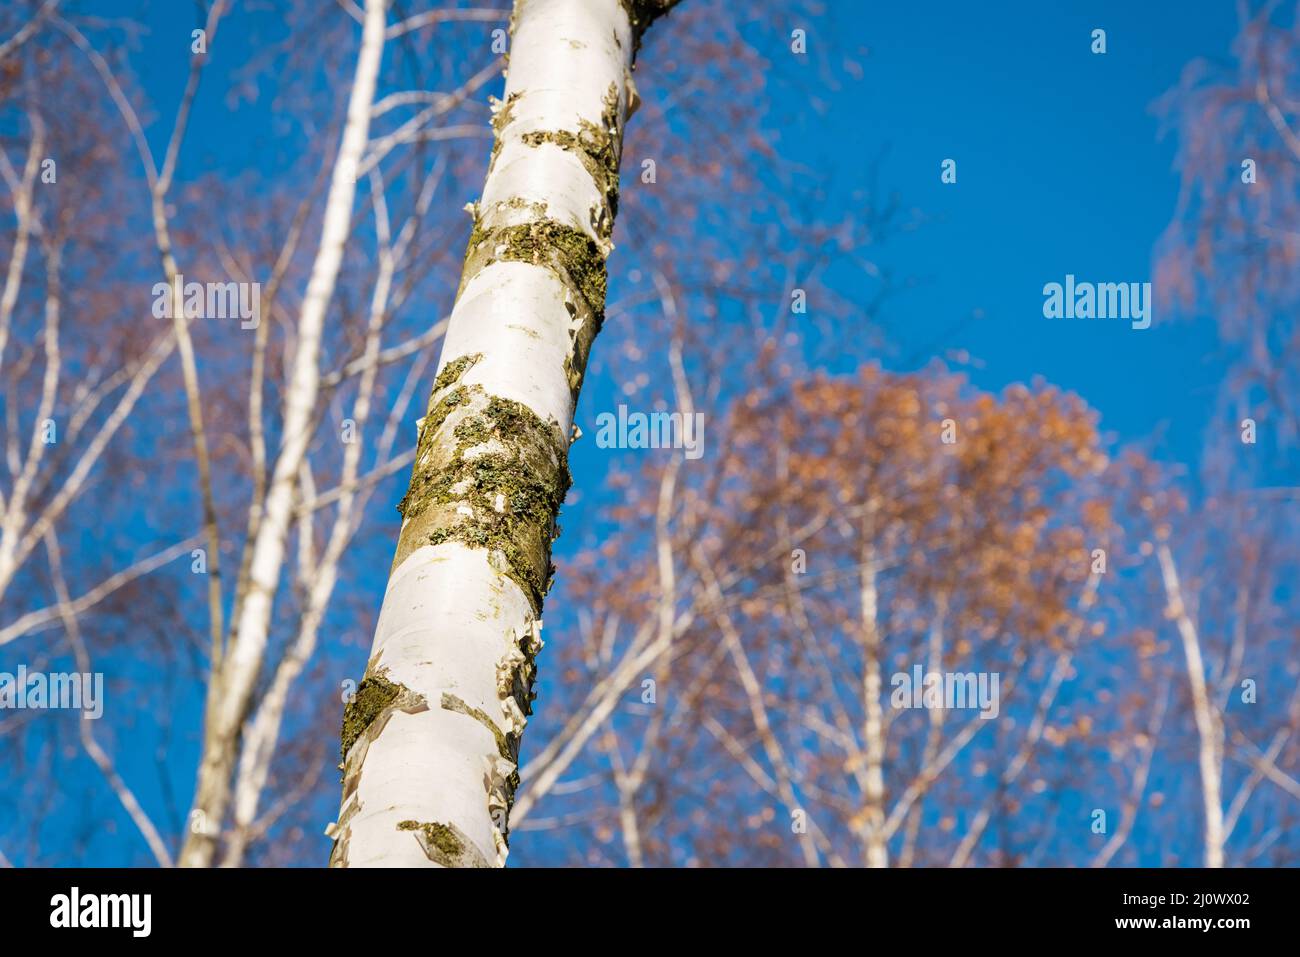 Birch trees in winter with blue sky Stock Photo